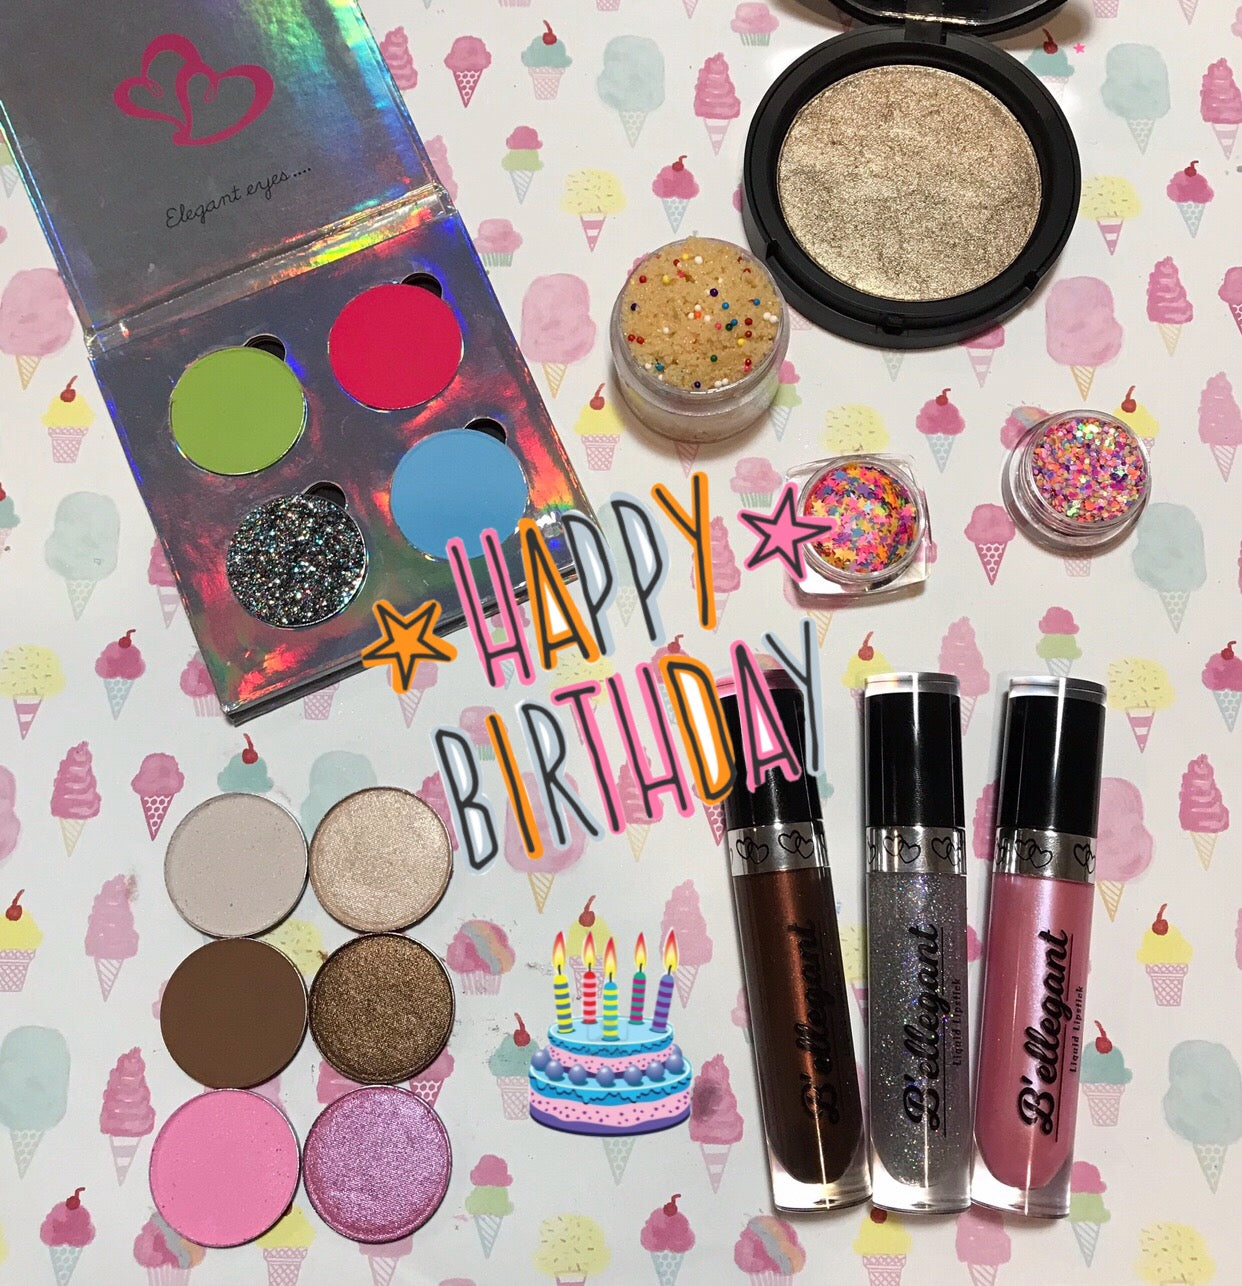 Full Birthday Collection + Free surprise gift